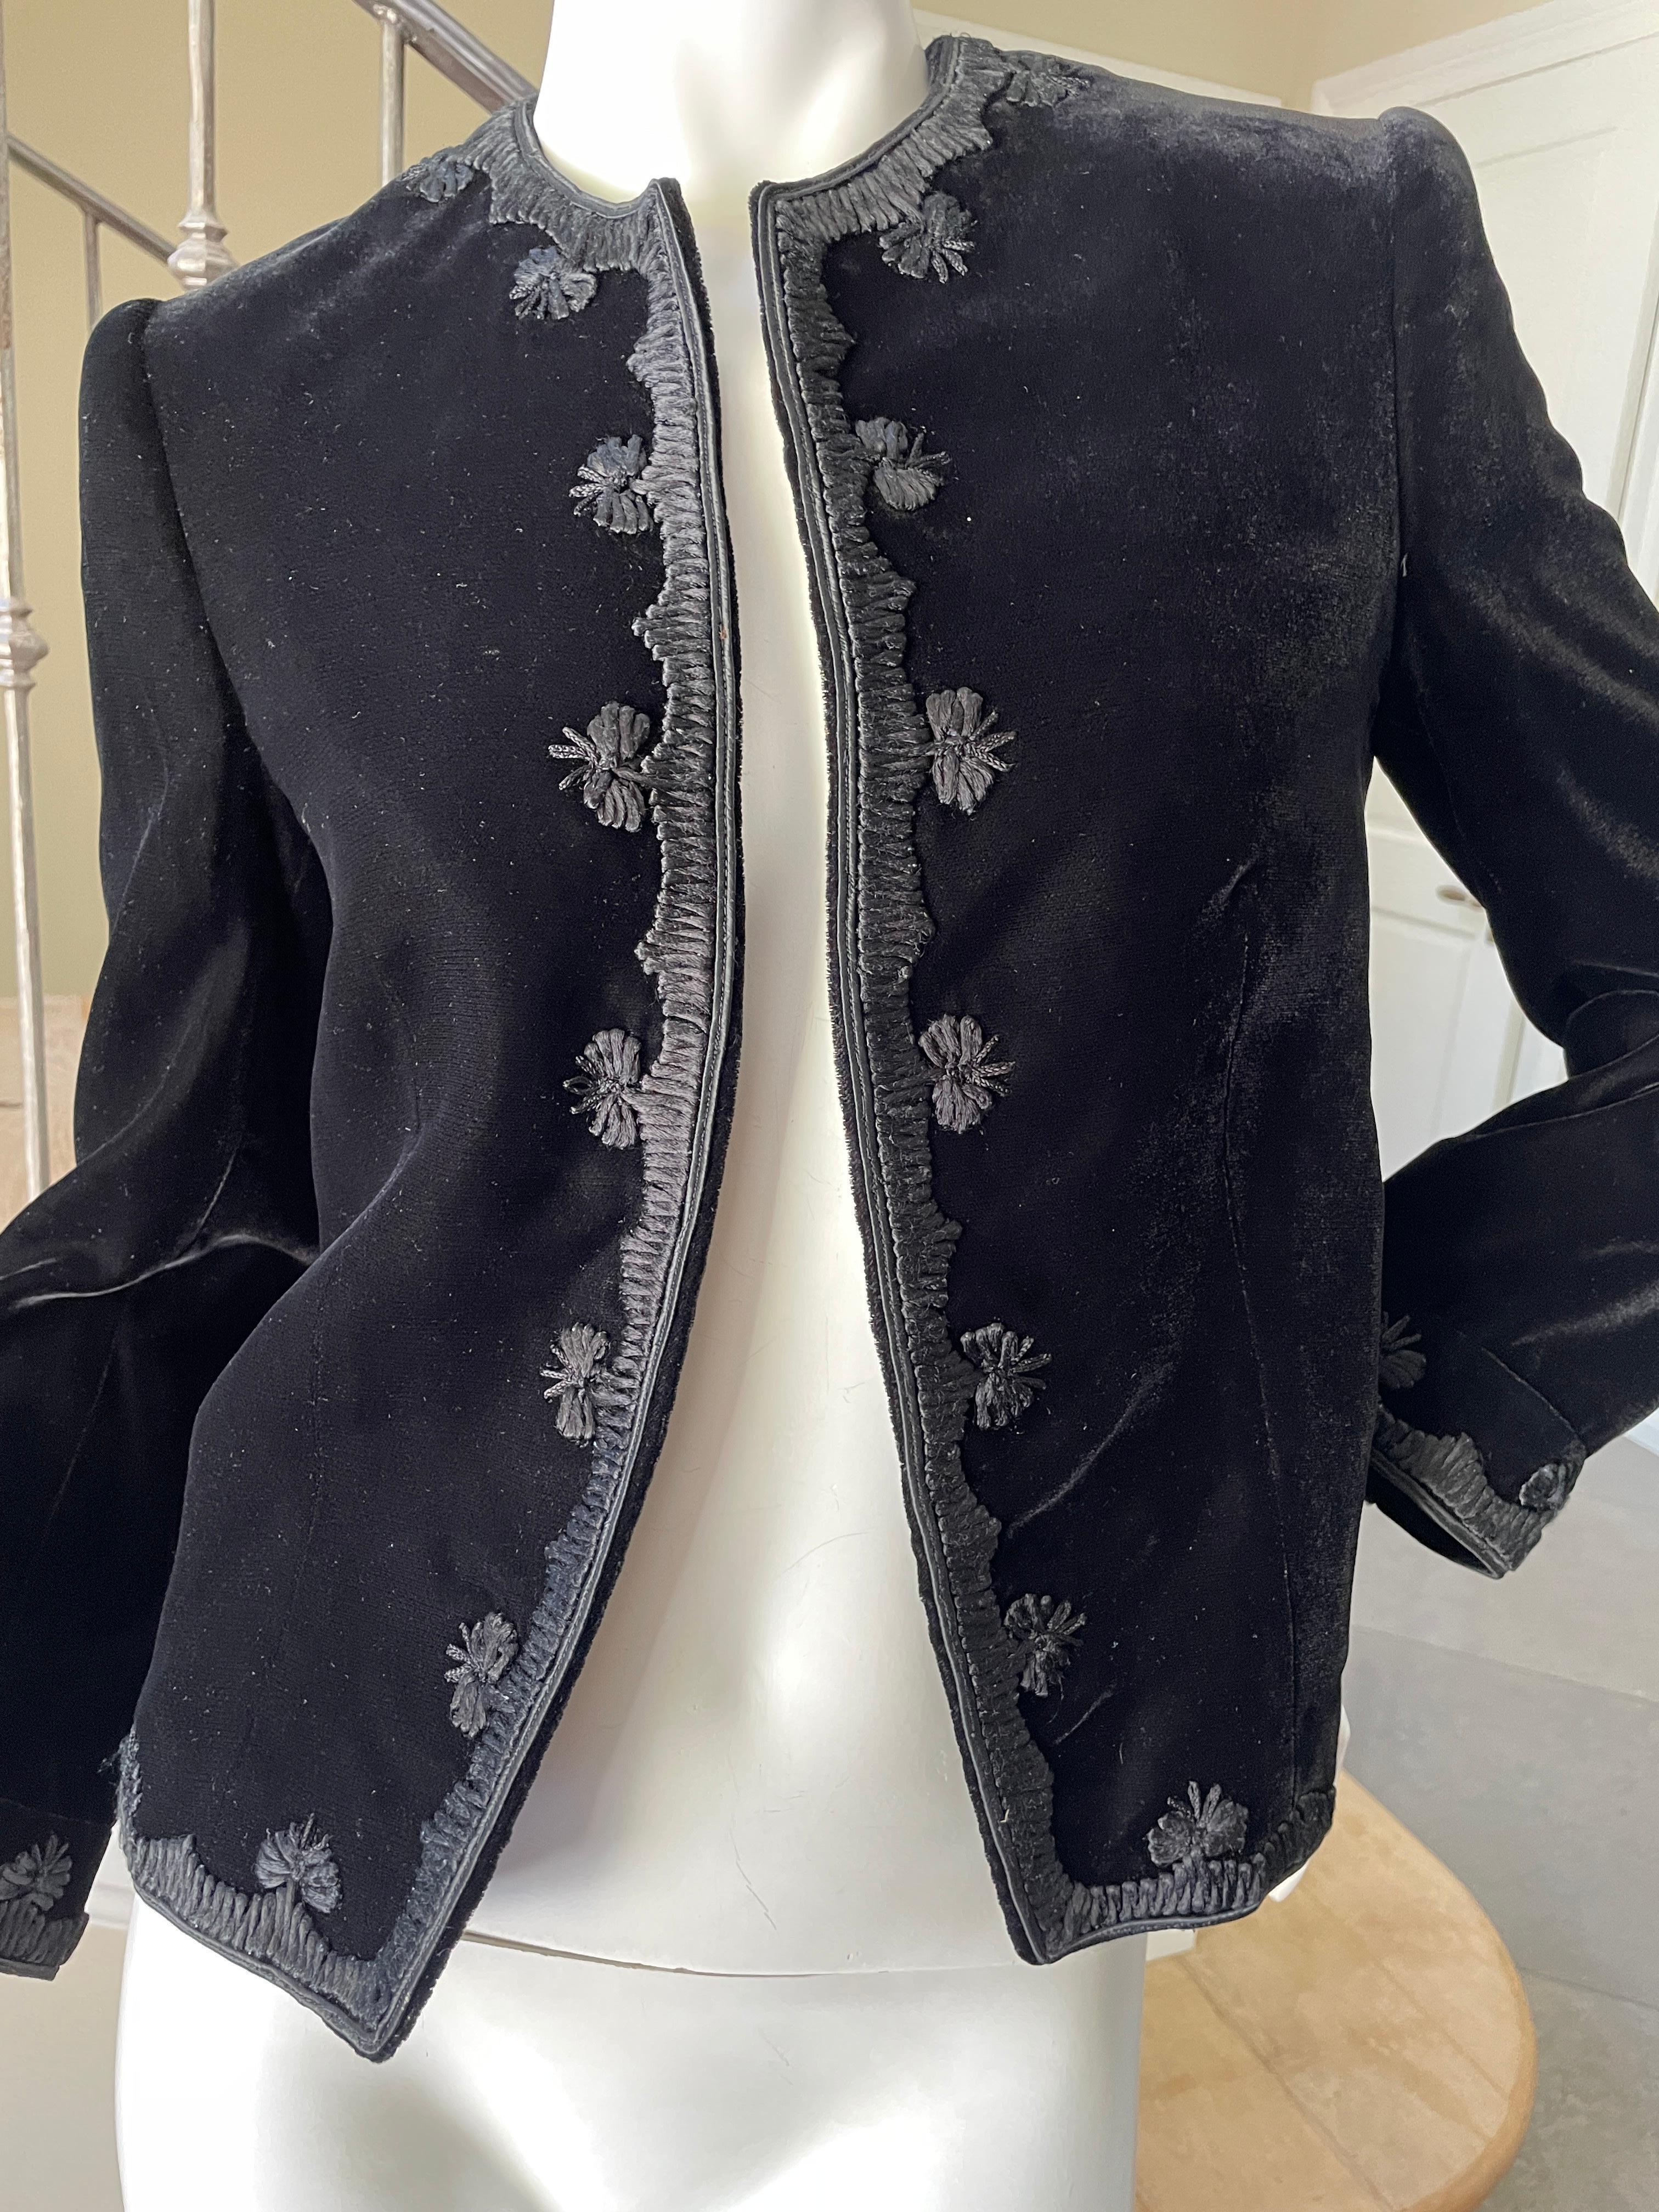 Jean-Louis Couture 1960's Black Velvet Jacket with Embroidered Details For Sale 6